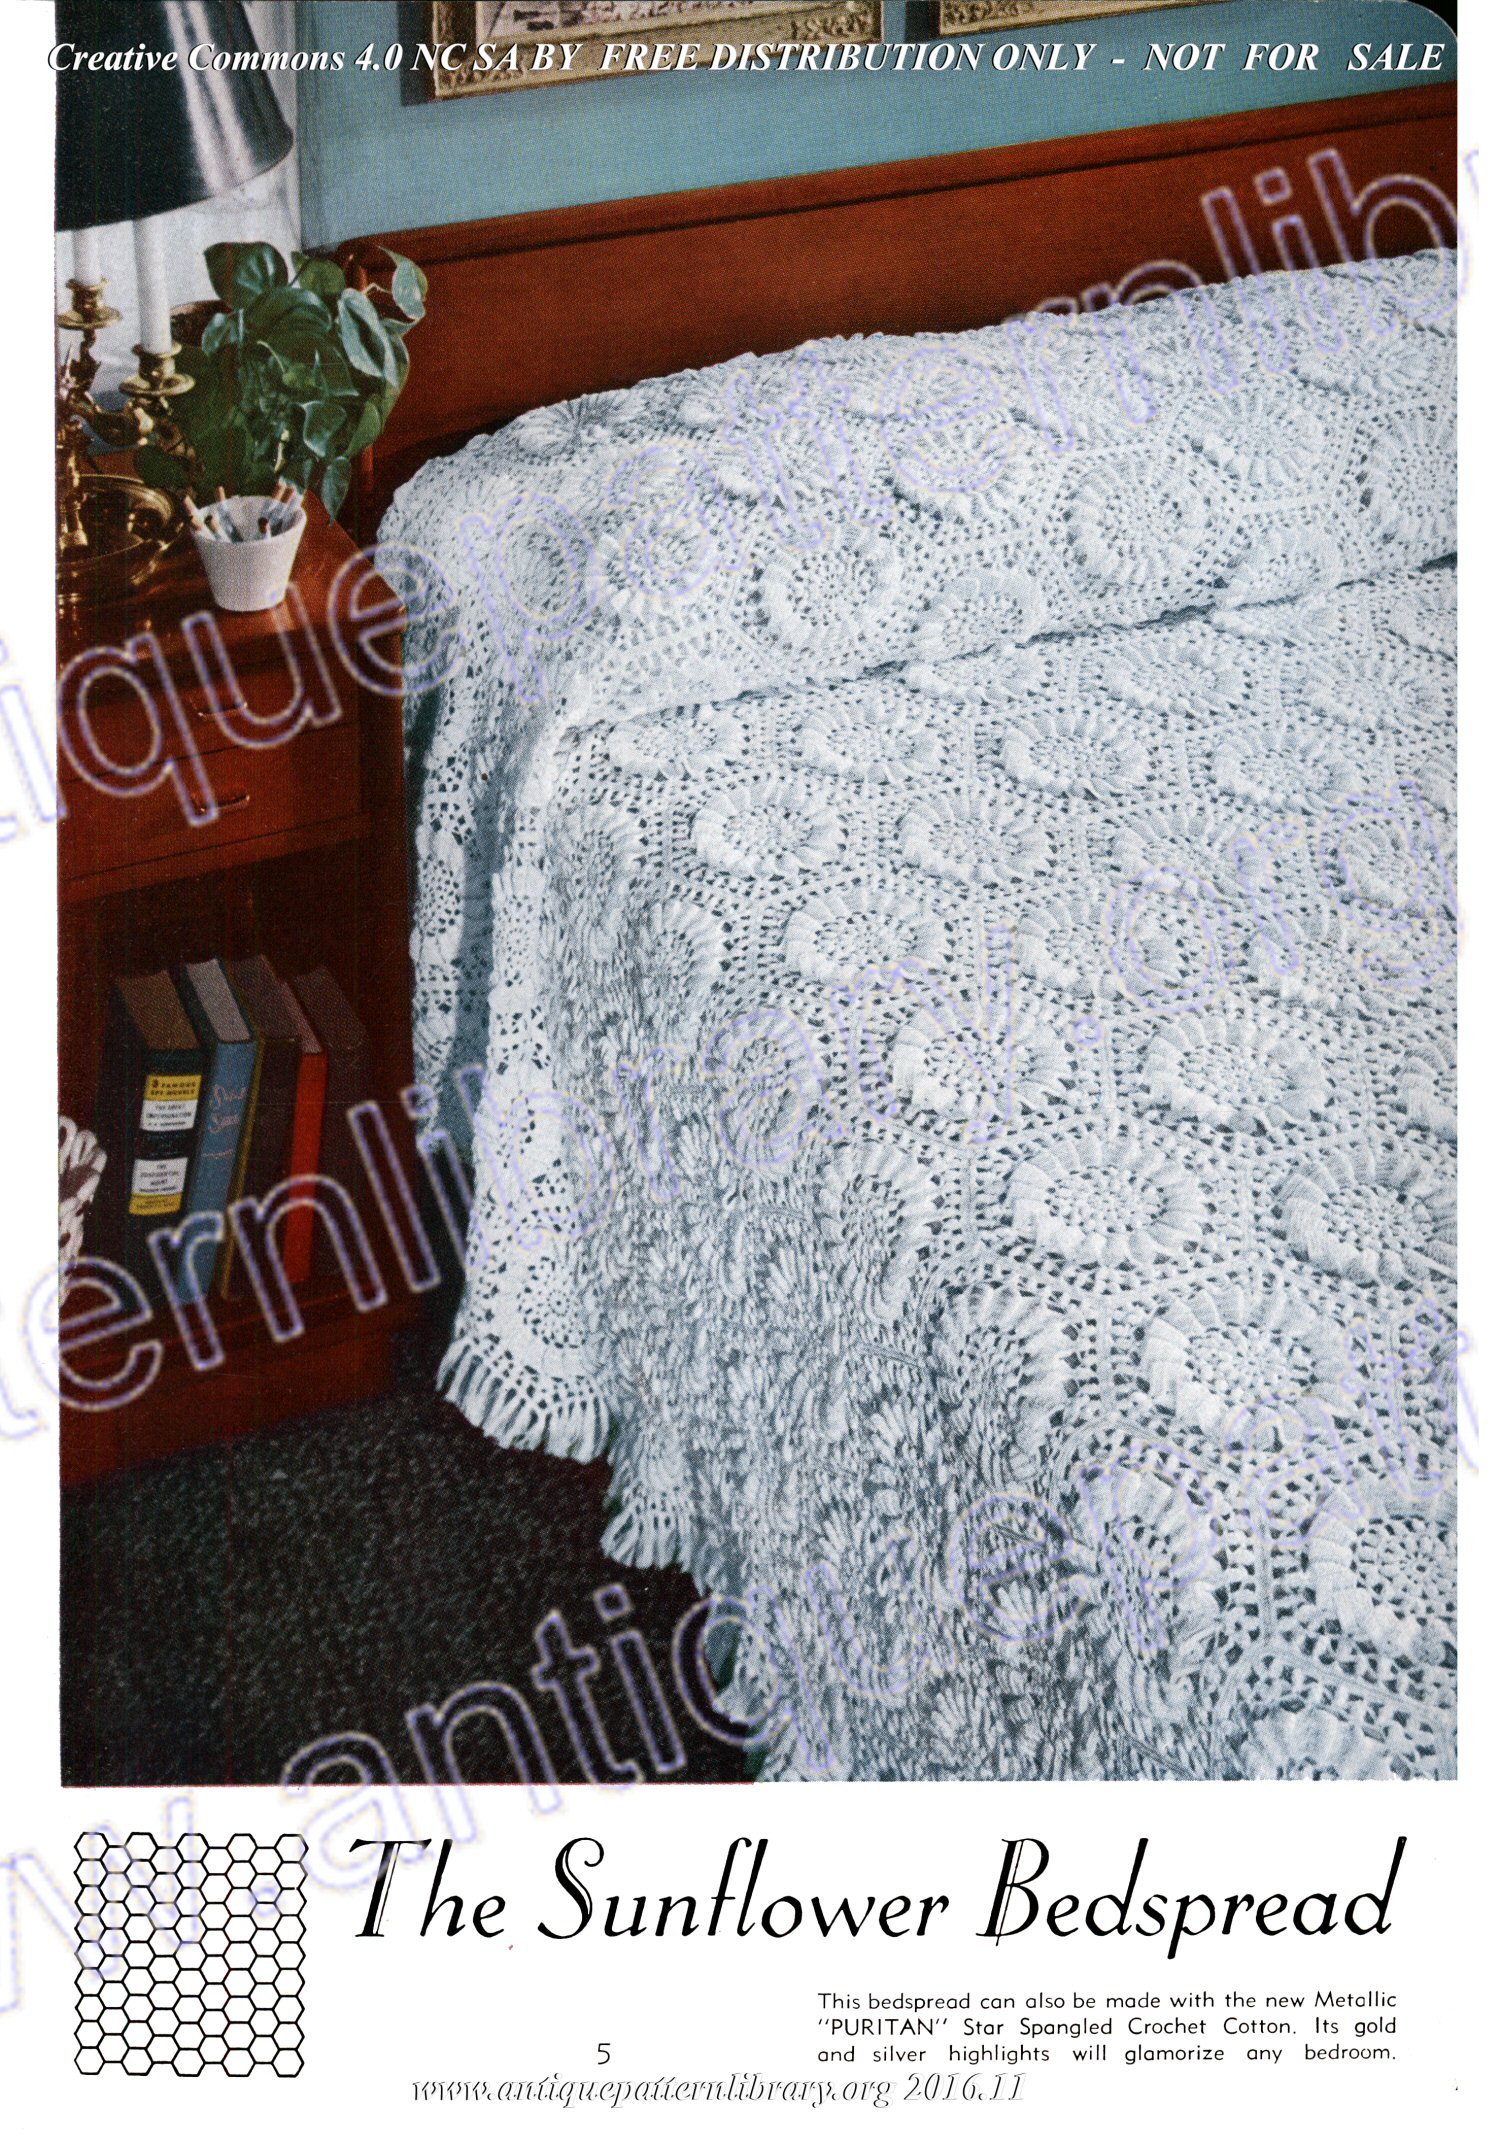 G-HD008 Bedspreads and Tablecloths